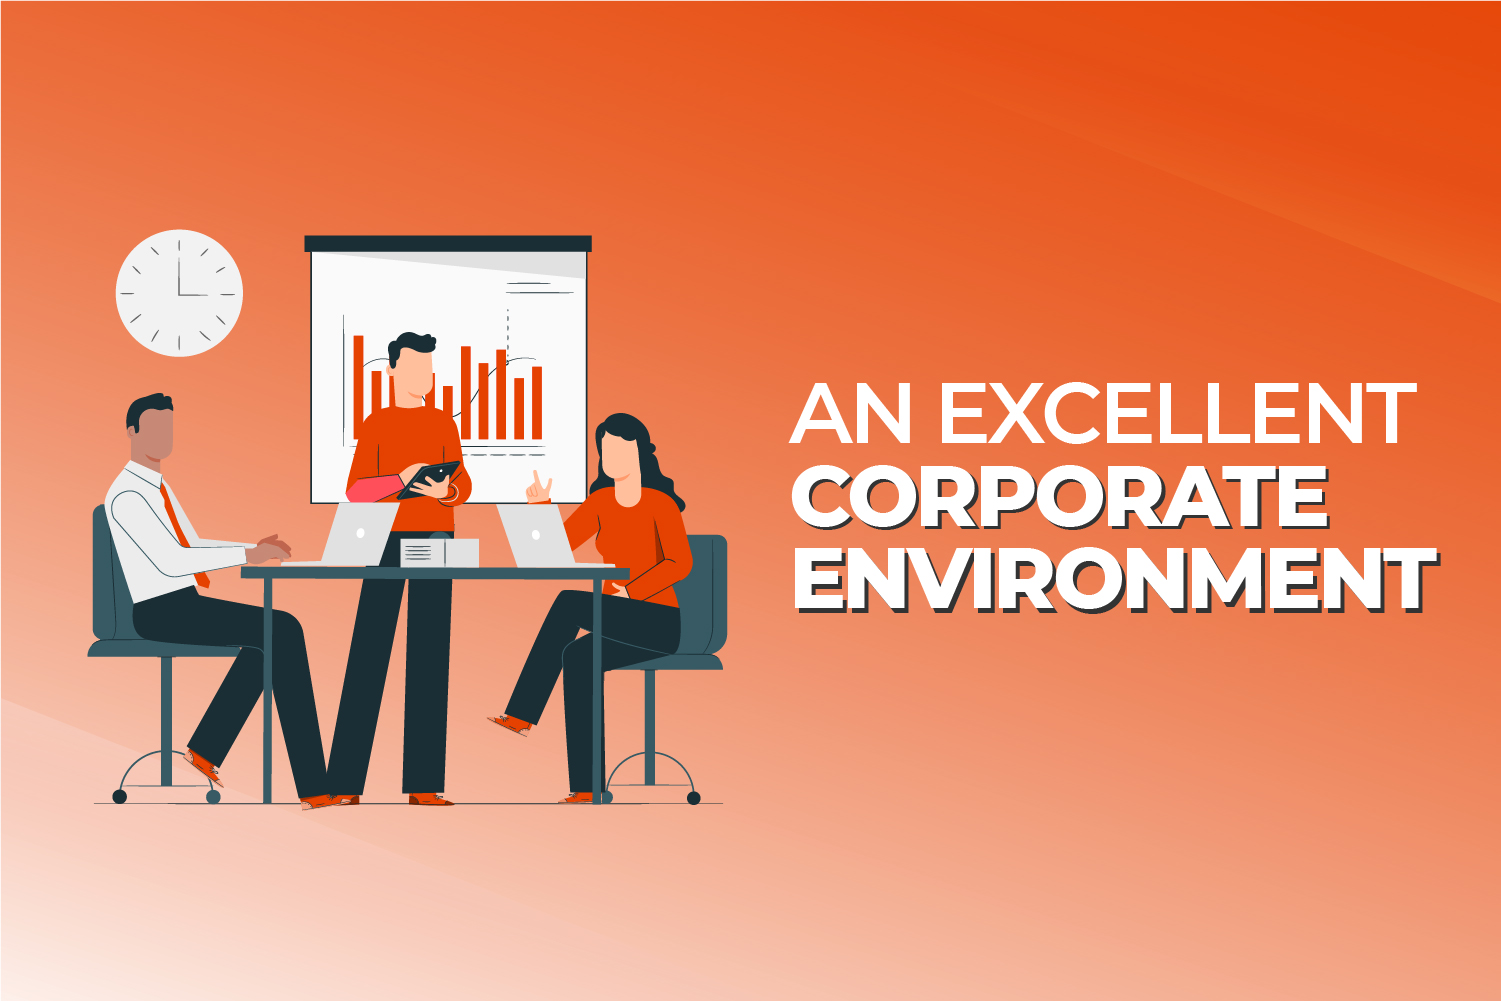 An excellent corporate environment